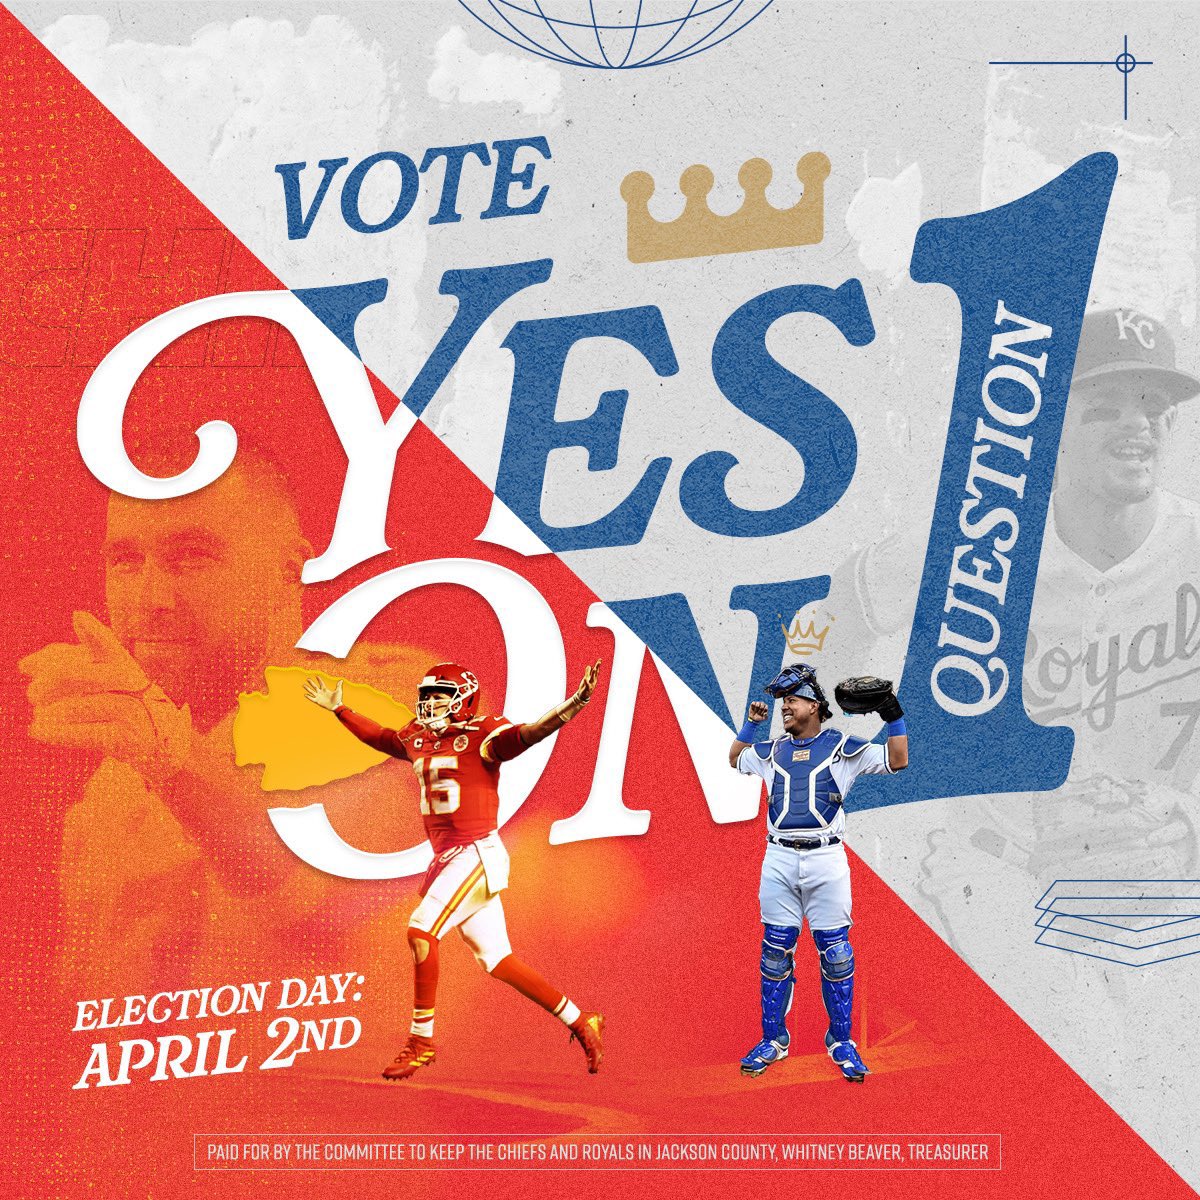 If you live in Jackson County, get out and vote Yes on Question 1 today. It’s time to usher in a new era of sports in Kansas City.